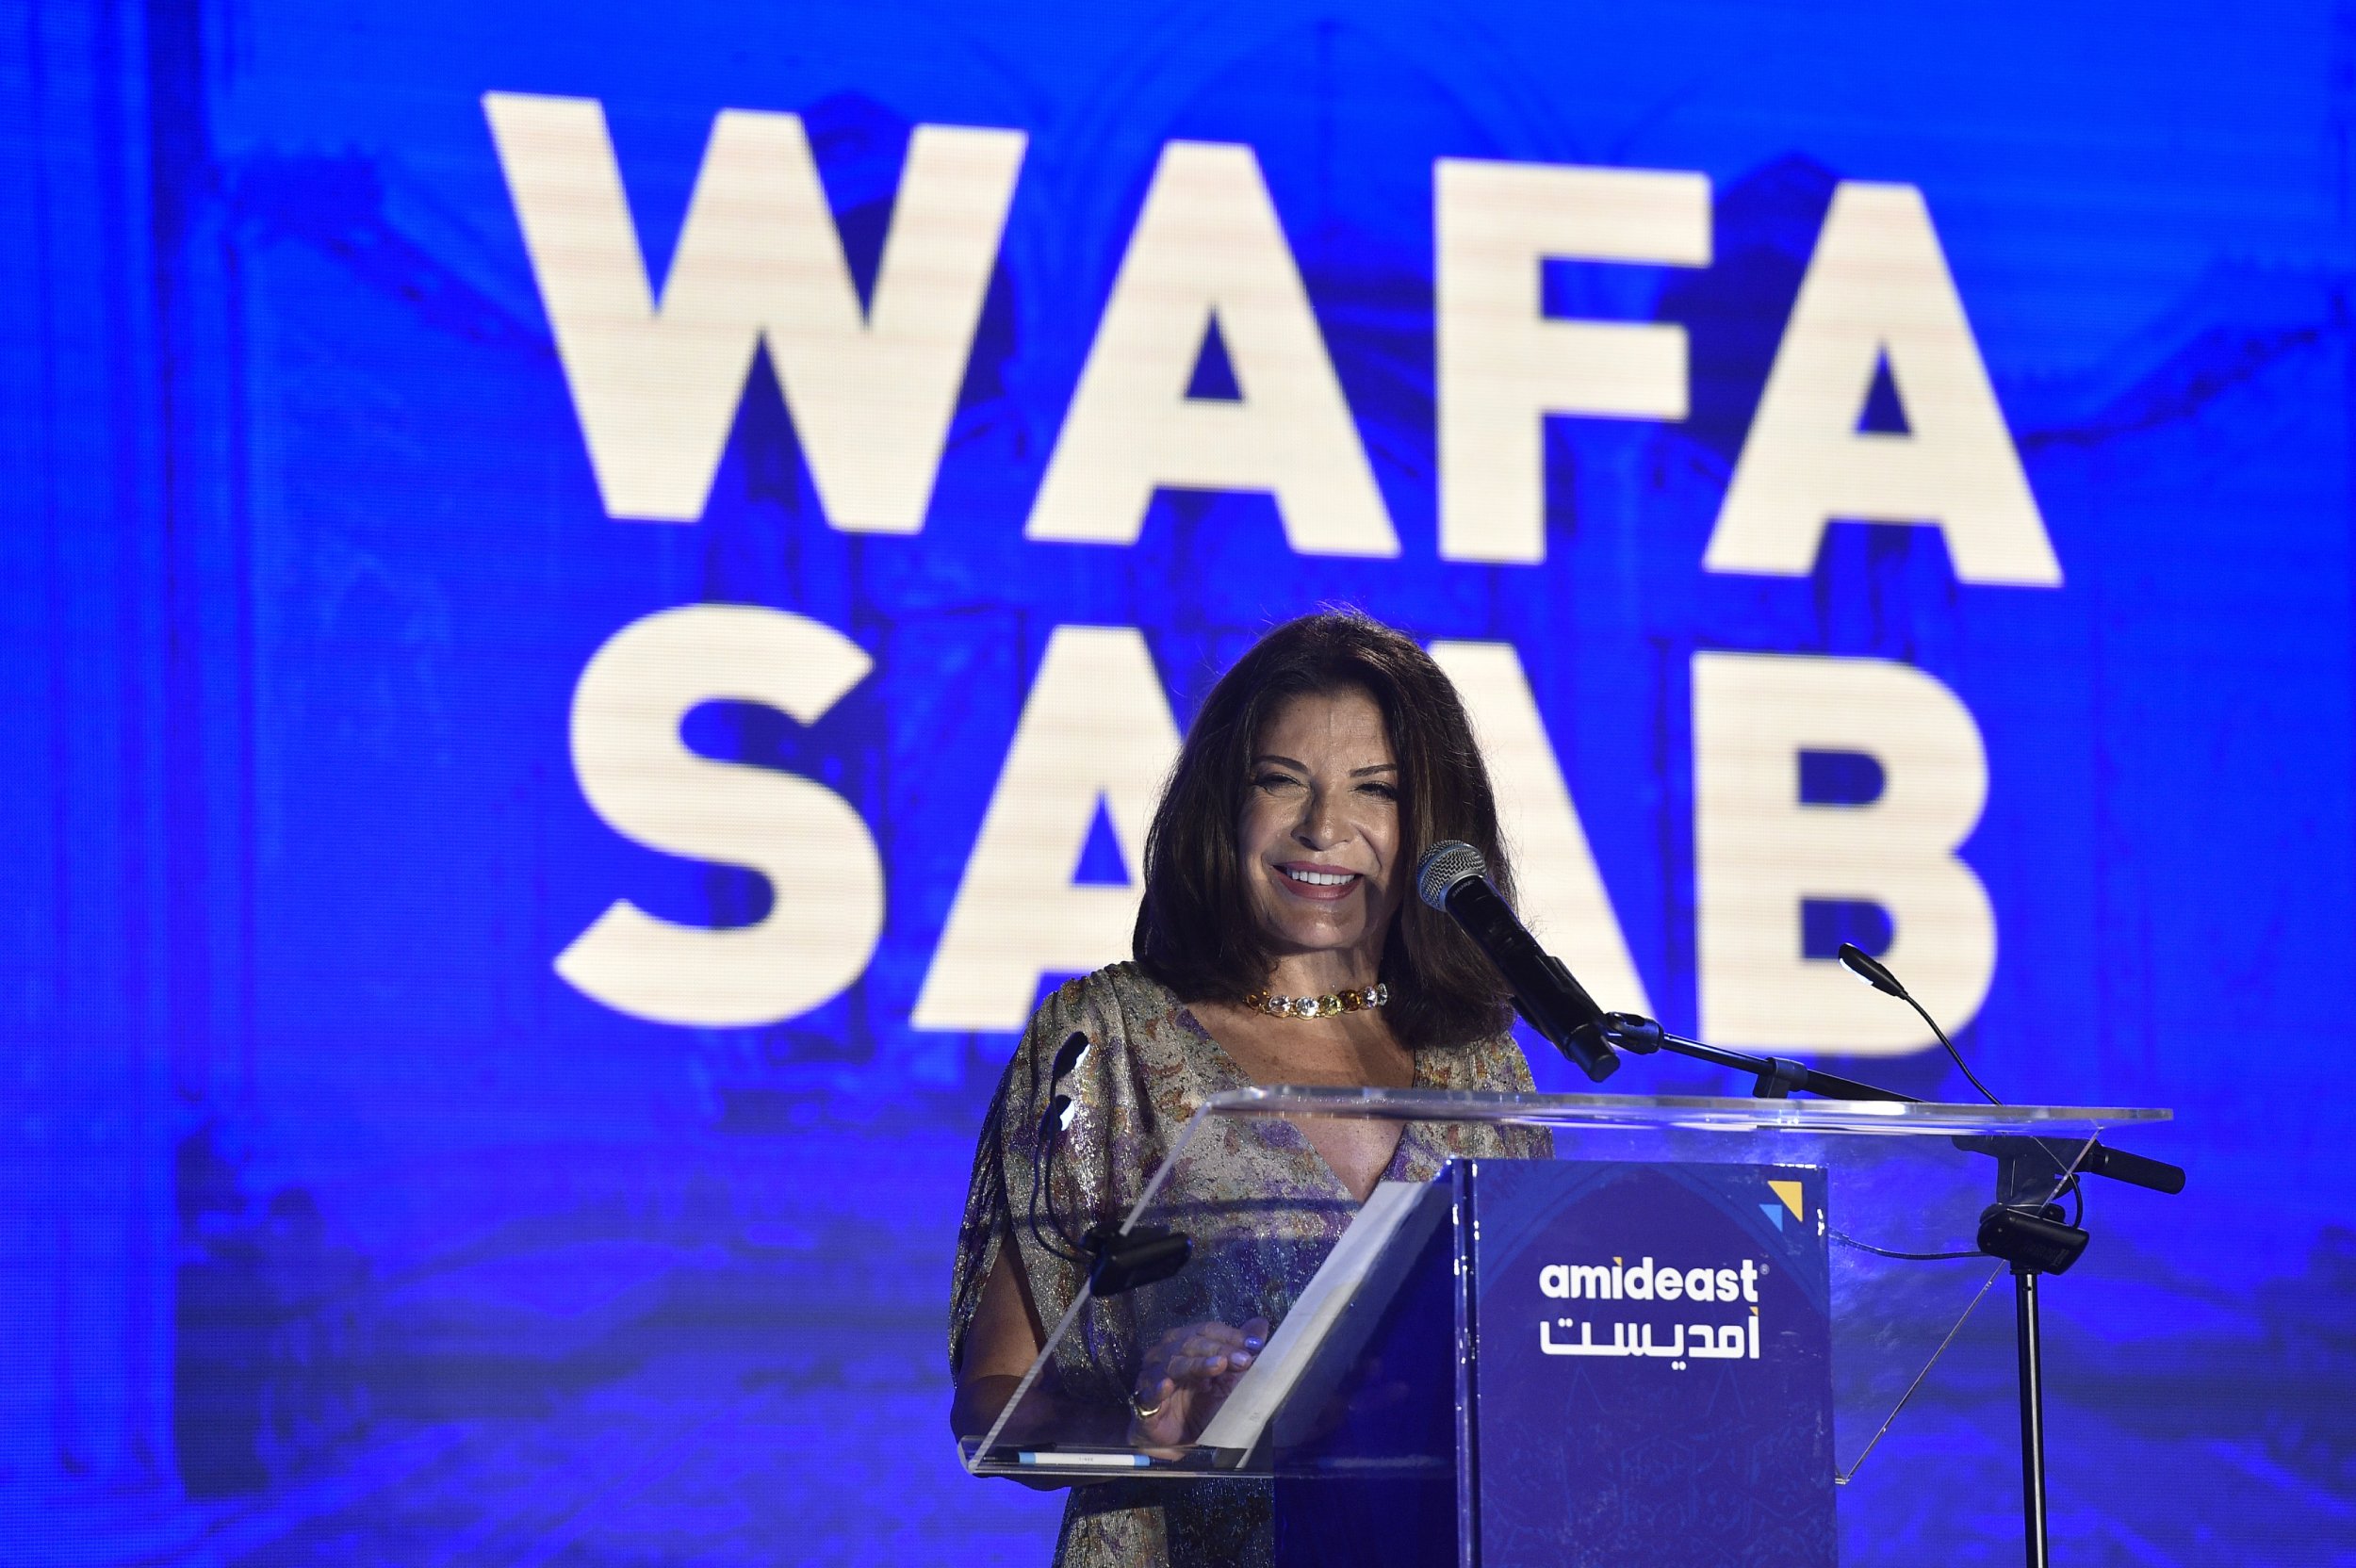 Wafa Saab smiles while speaking at a podium with the Amideast logo. Her name is displayed prominently on a screen behind her.